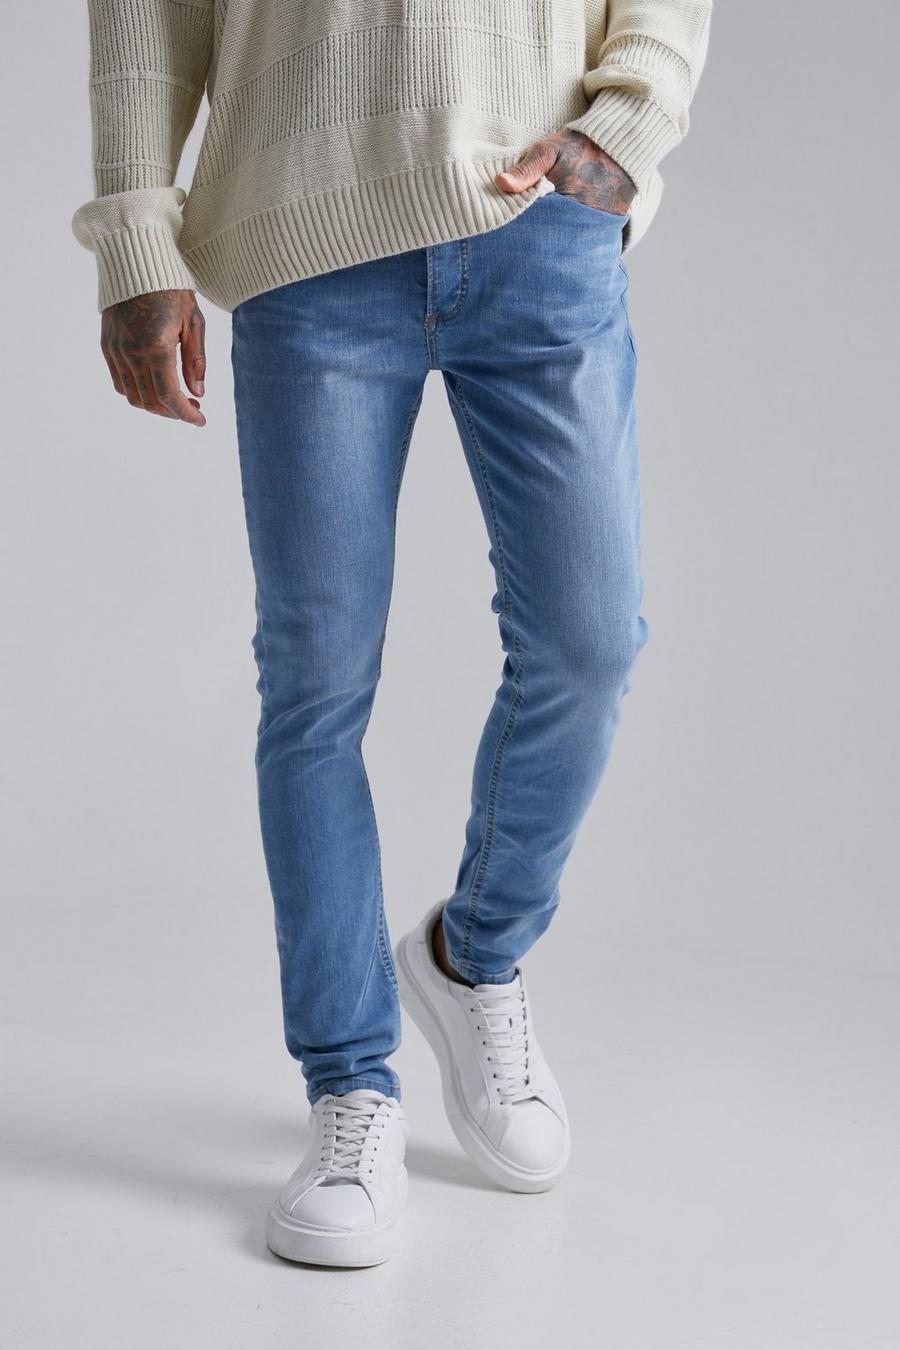 Buy Mens Ripped Jeans Slim Fit Skinny Stretch Jean for Men Tapered